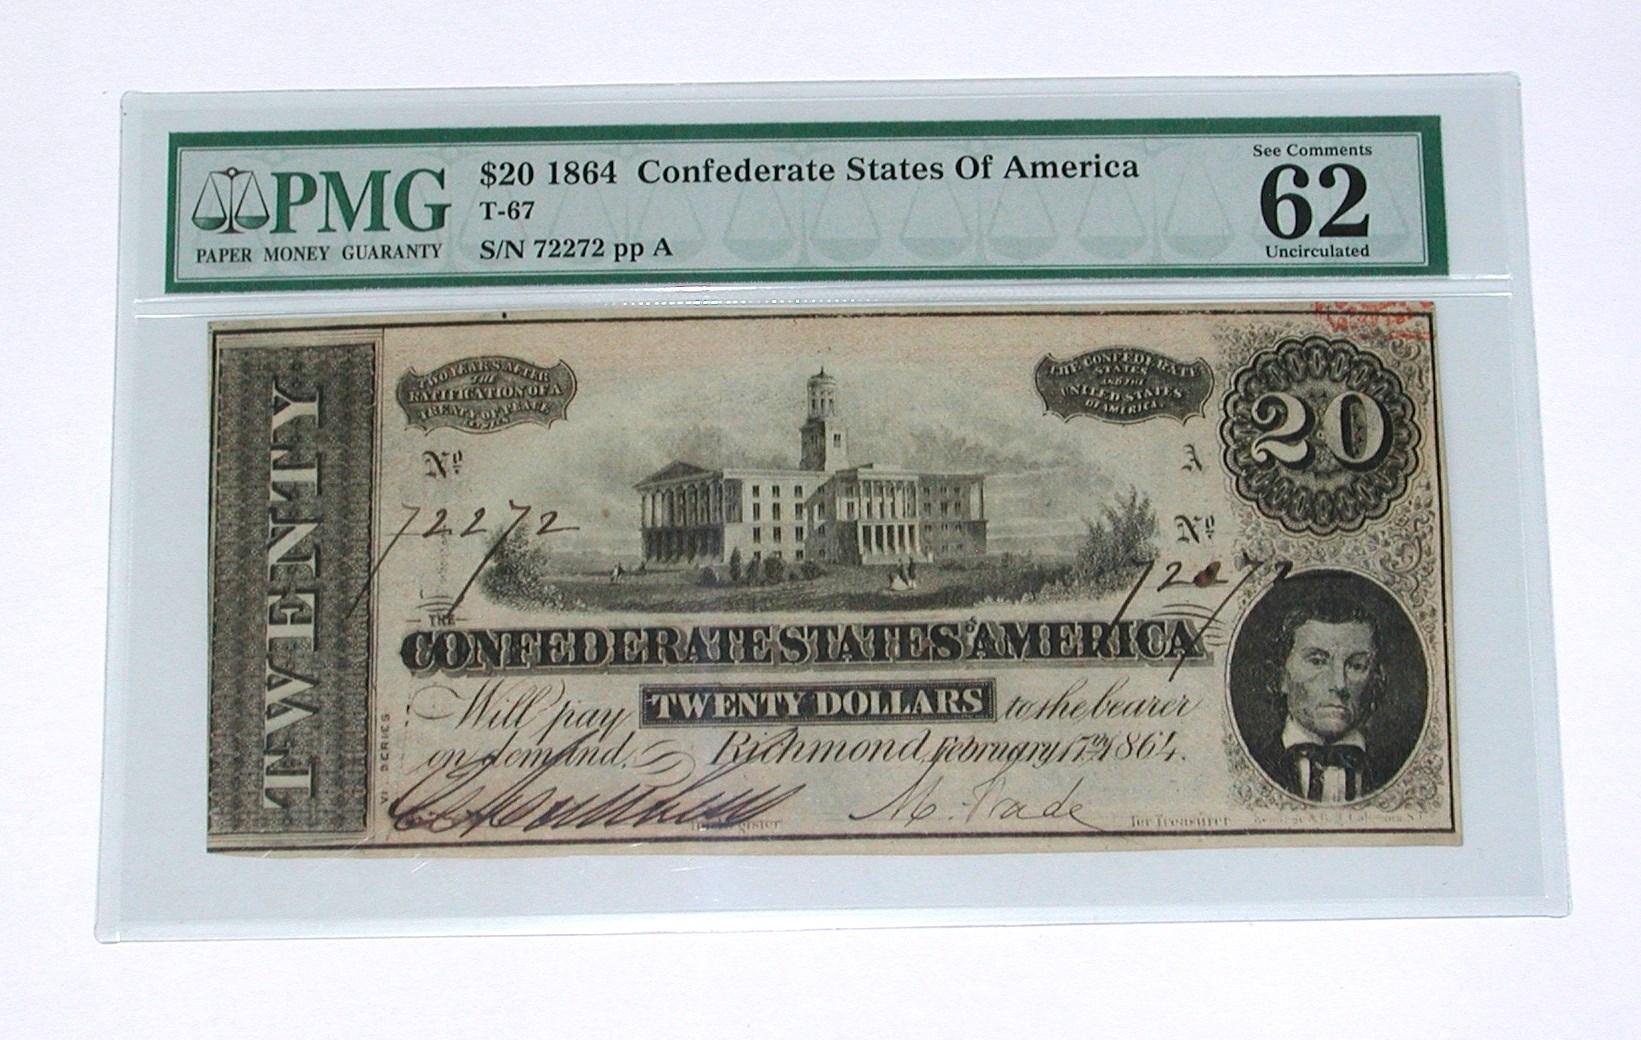 1864 CONFEDERATE $20 NOTE - T-67 - PMG 62 EXCEPTIONAL PAPER QUALITY